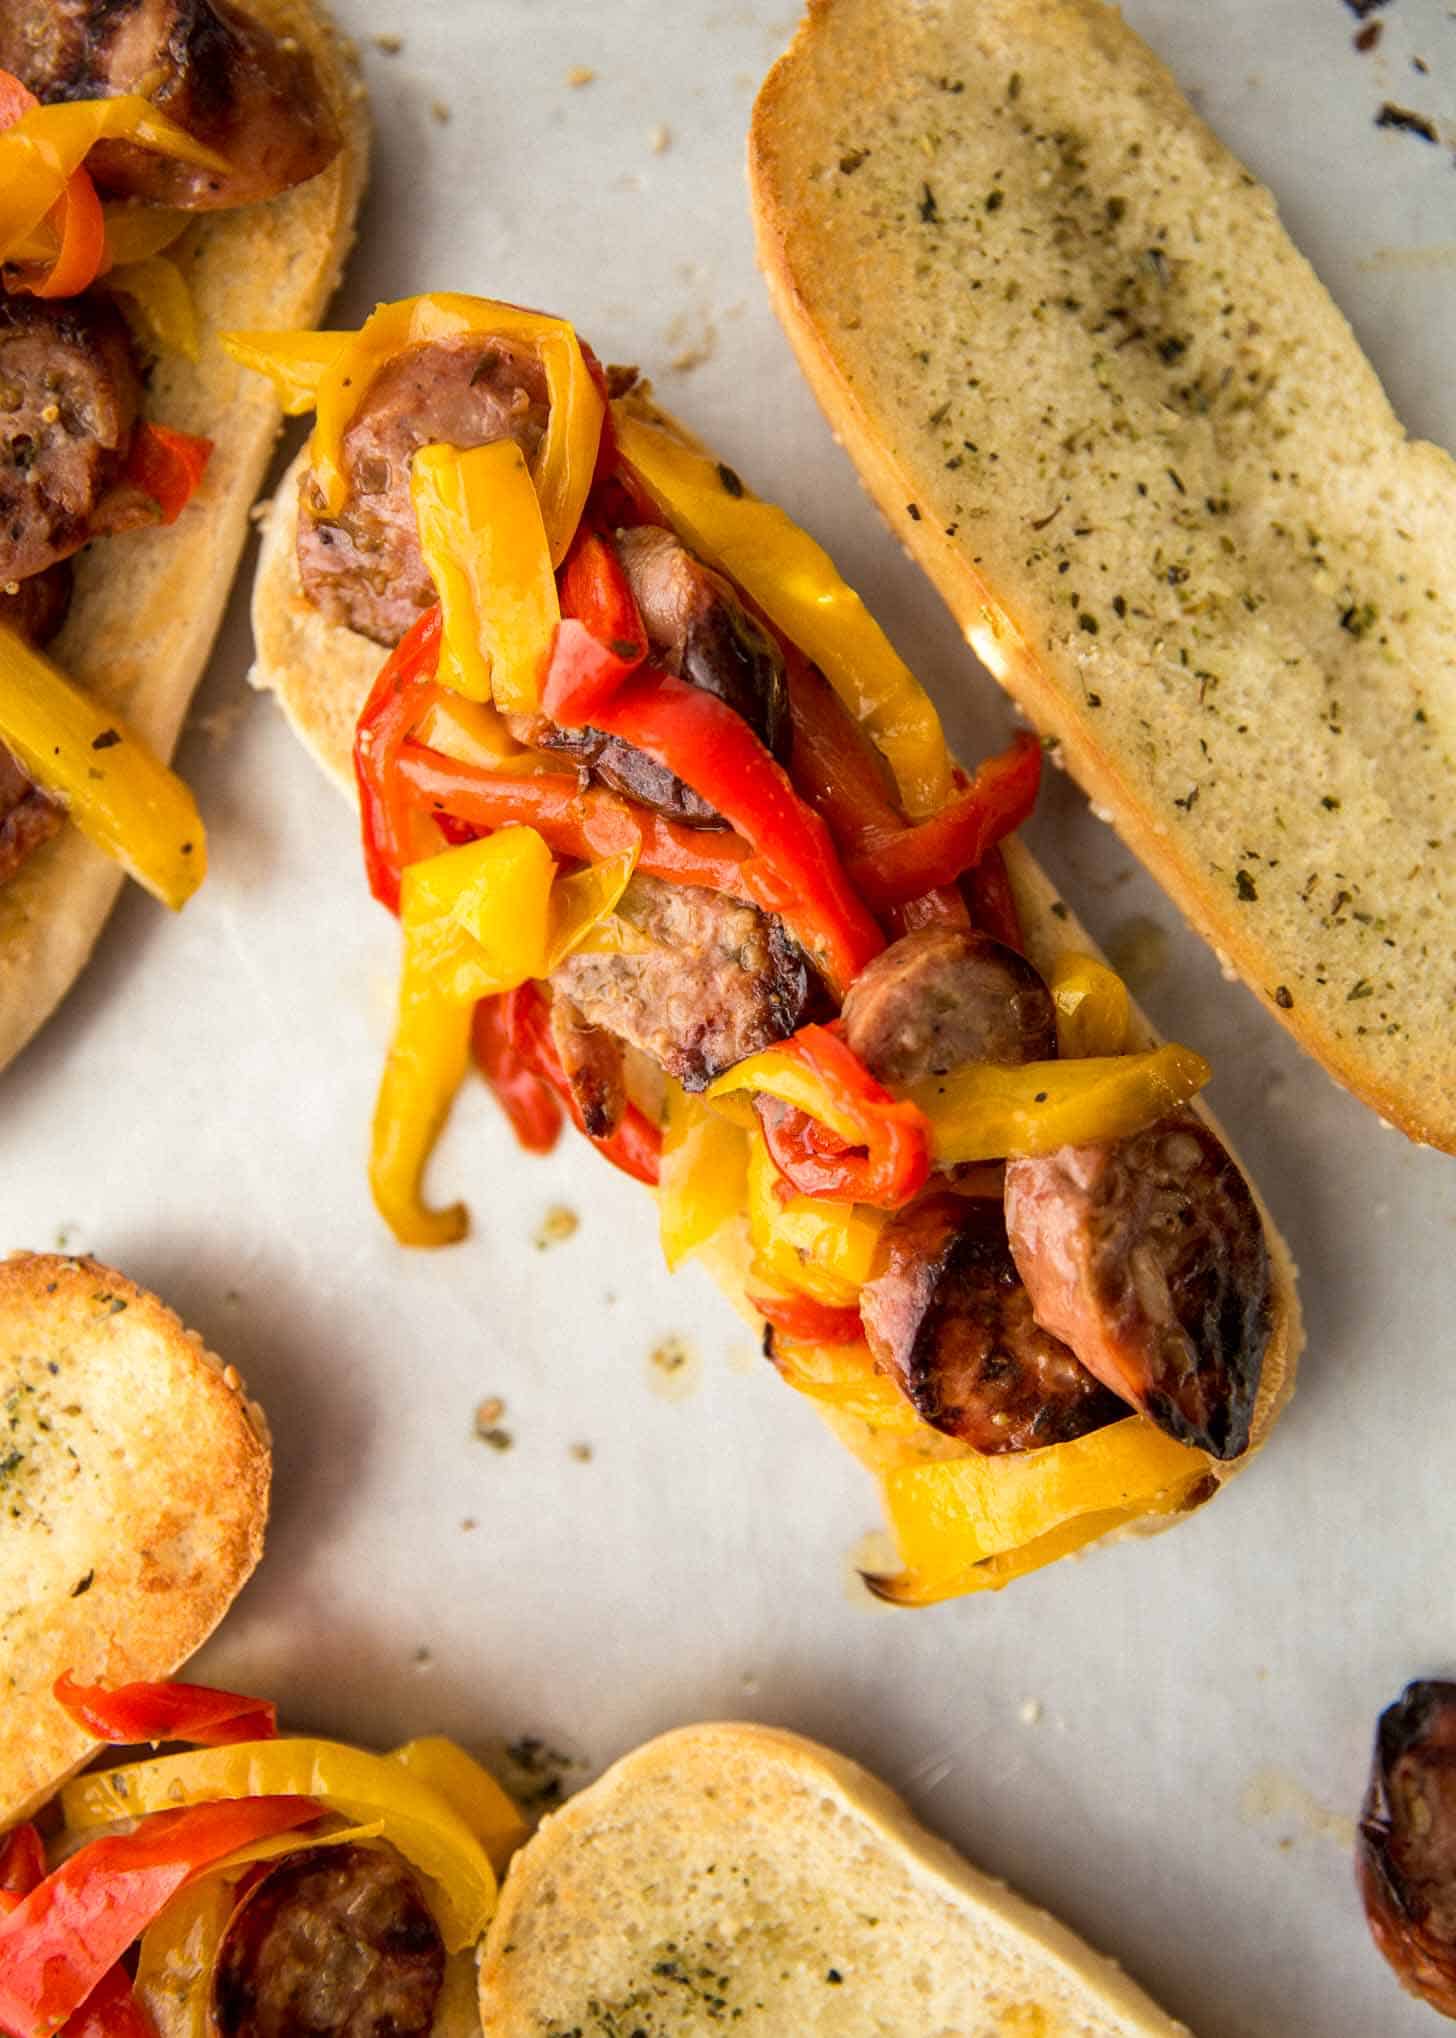 sausage and peppers on a bun